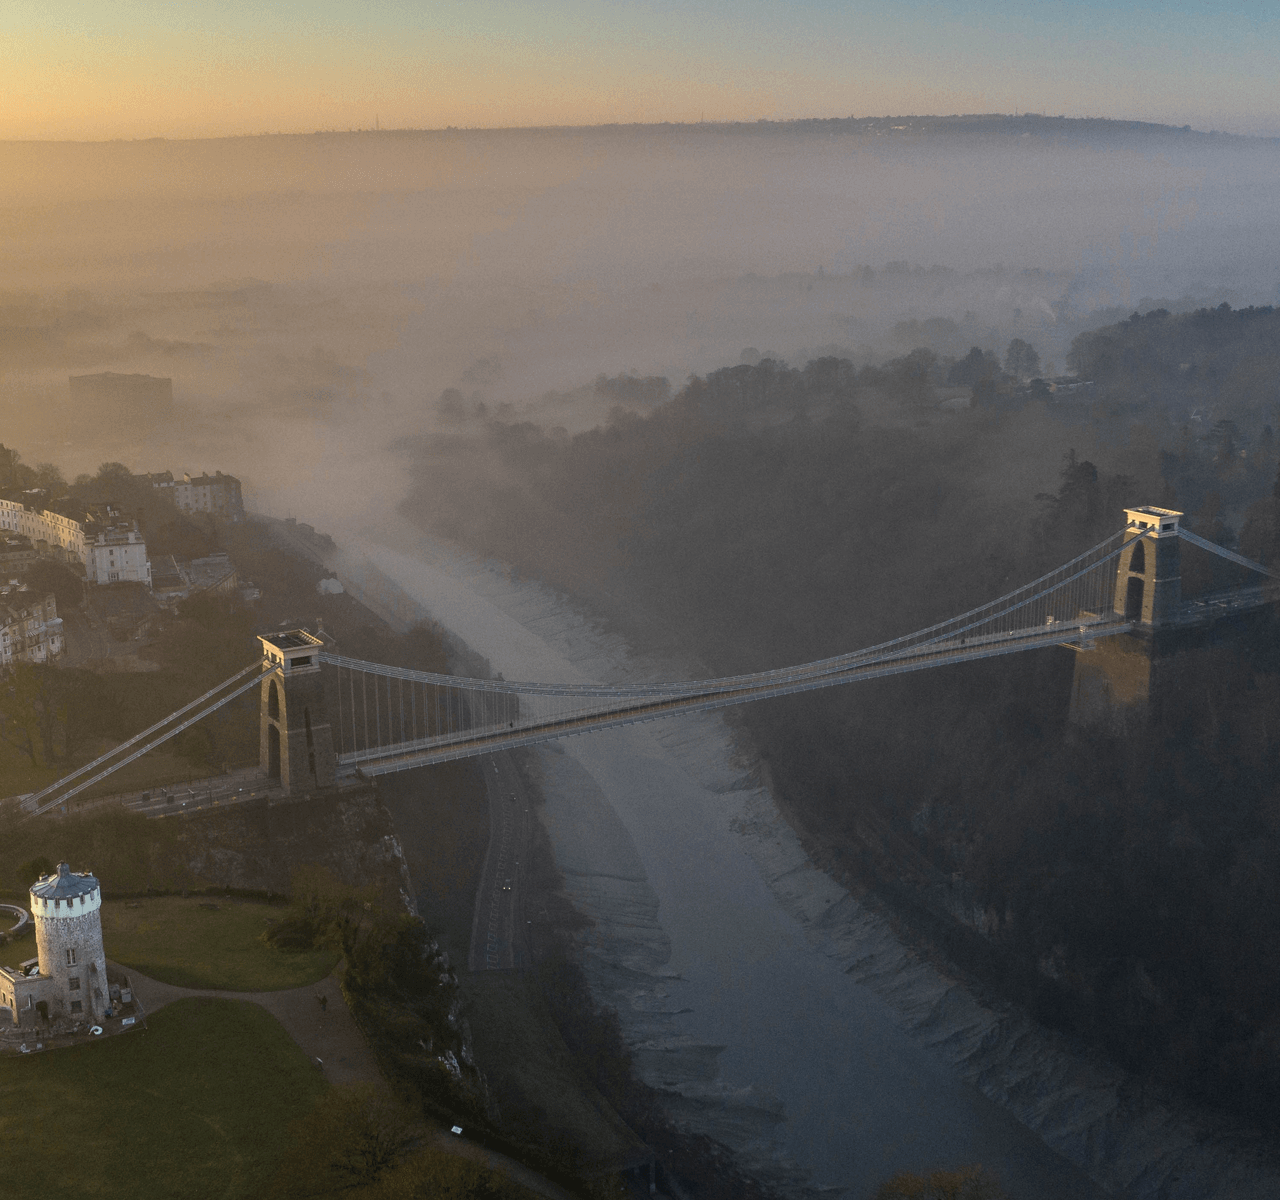 "Mavic 2 Pro" aerial drone photo of "Clifton Suspension Bridge" and the "Clifton Observatory" on during a foggy sunrise